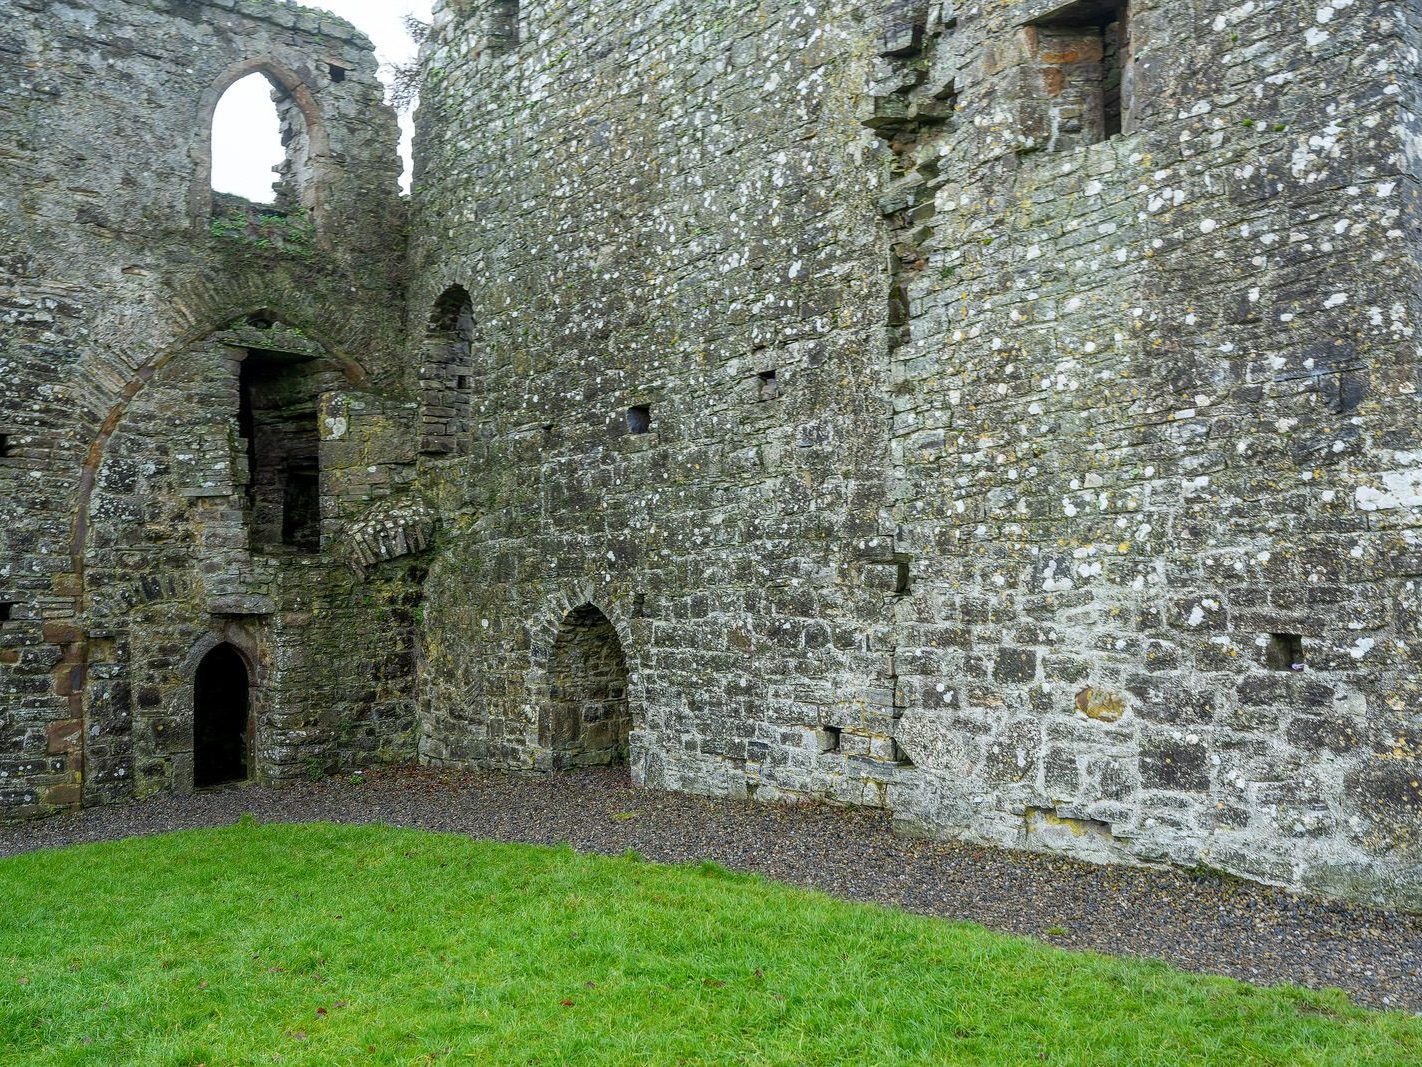 BECTIVE ABBEY WHICH I VISITED LAST CHRISTMAS [THERE WERE NO OTHER VISITORS AS IT WAS A VERY WET DAY]--225246-1